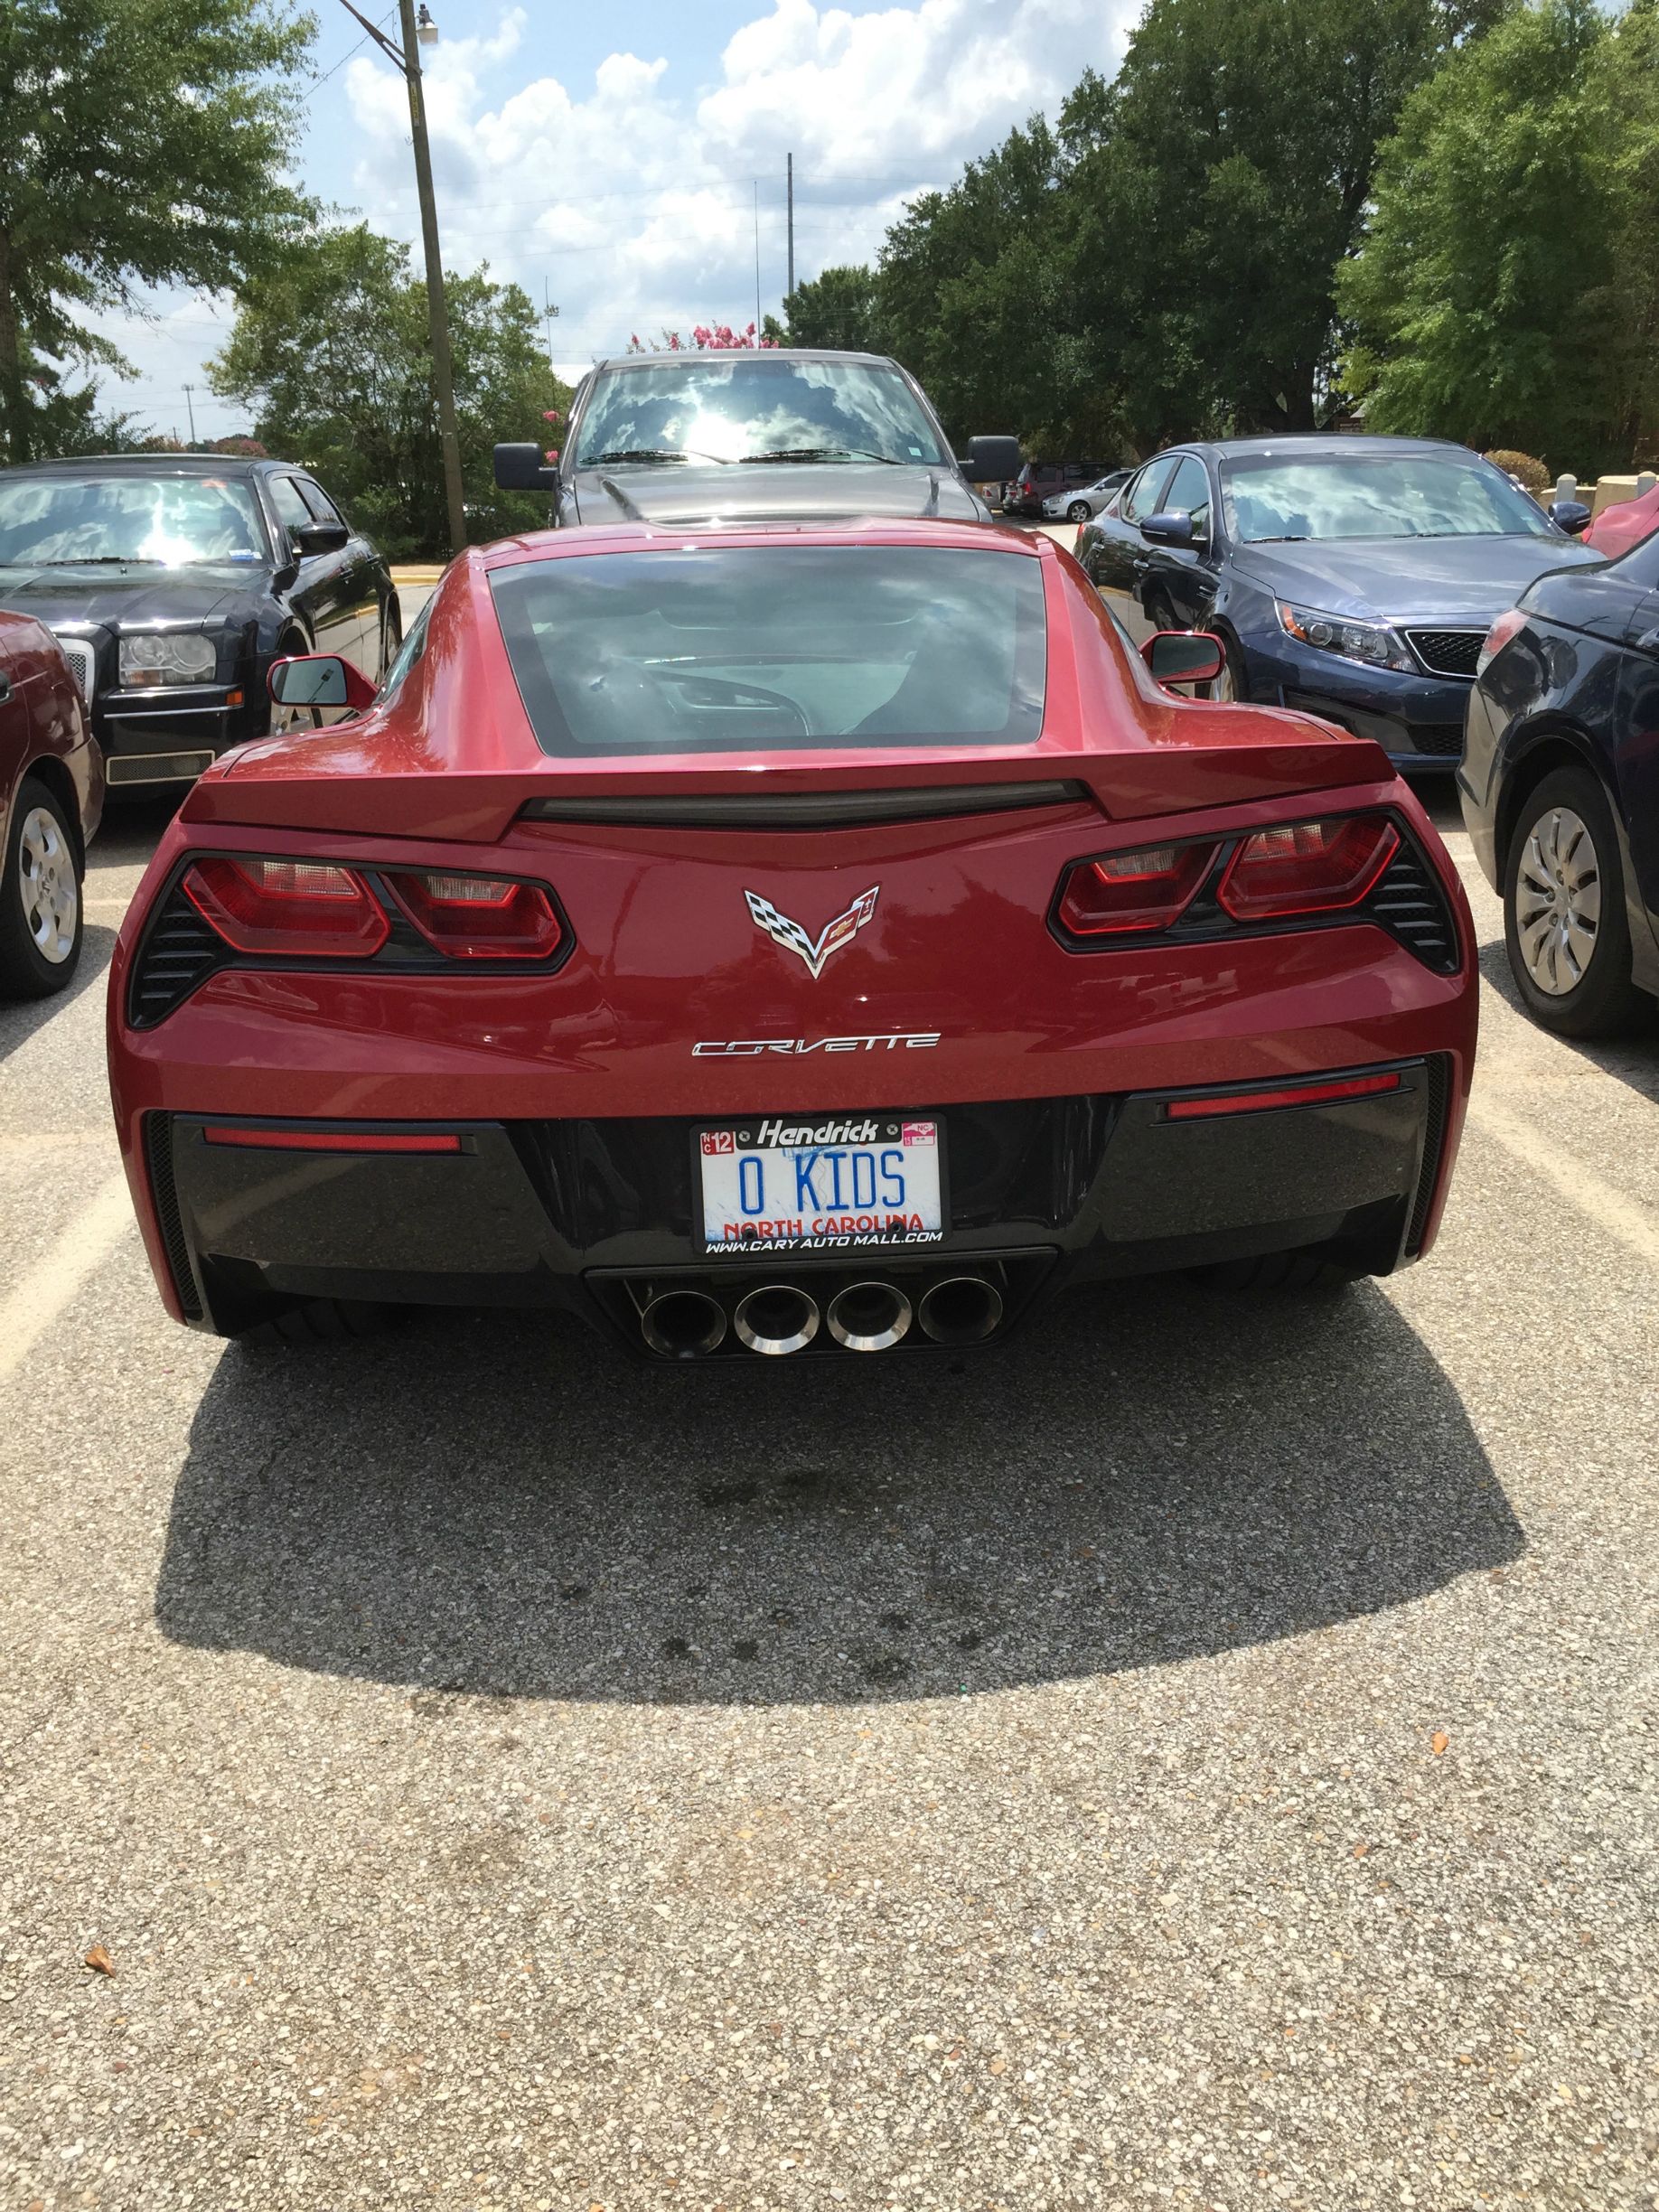 Funny picture of parked red Corvette with vanity plates that read O KIDS`